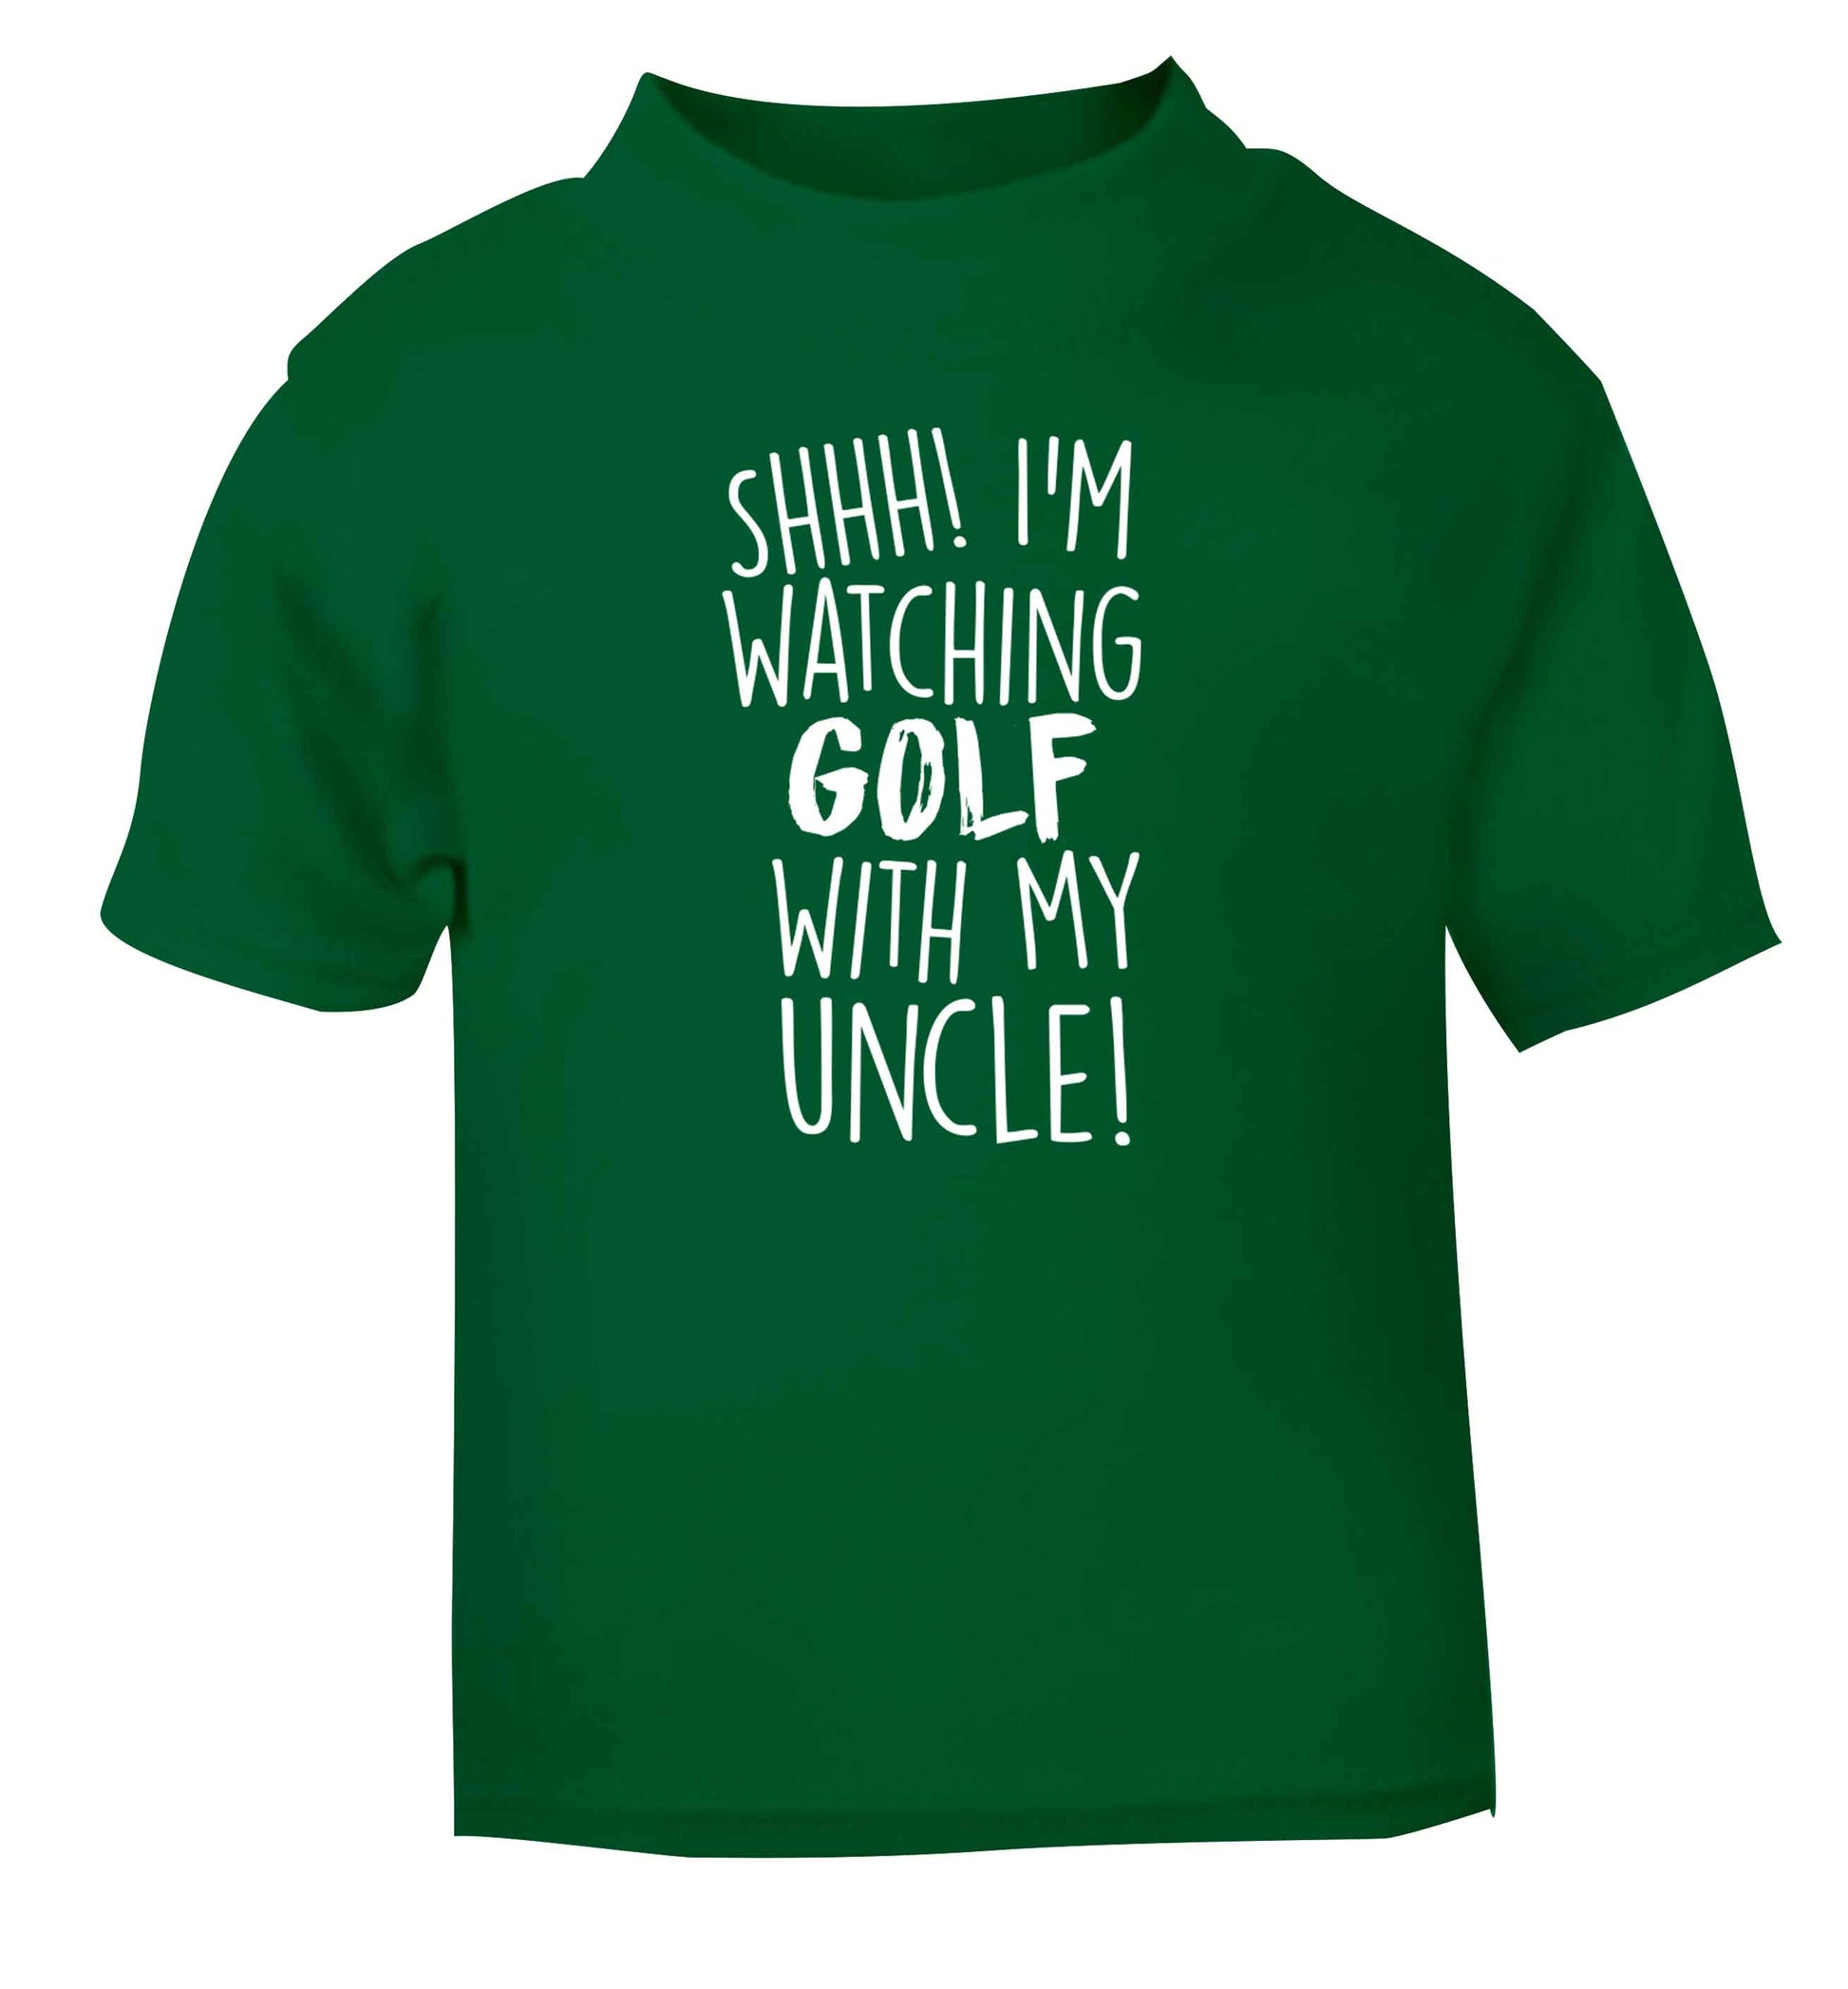 Shh I'm watching golf with my uncle green Baby Toddler Tshirt 2 Years